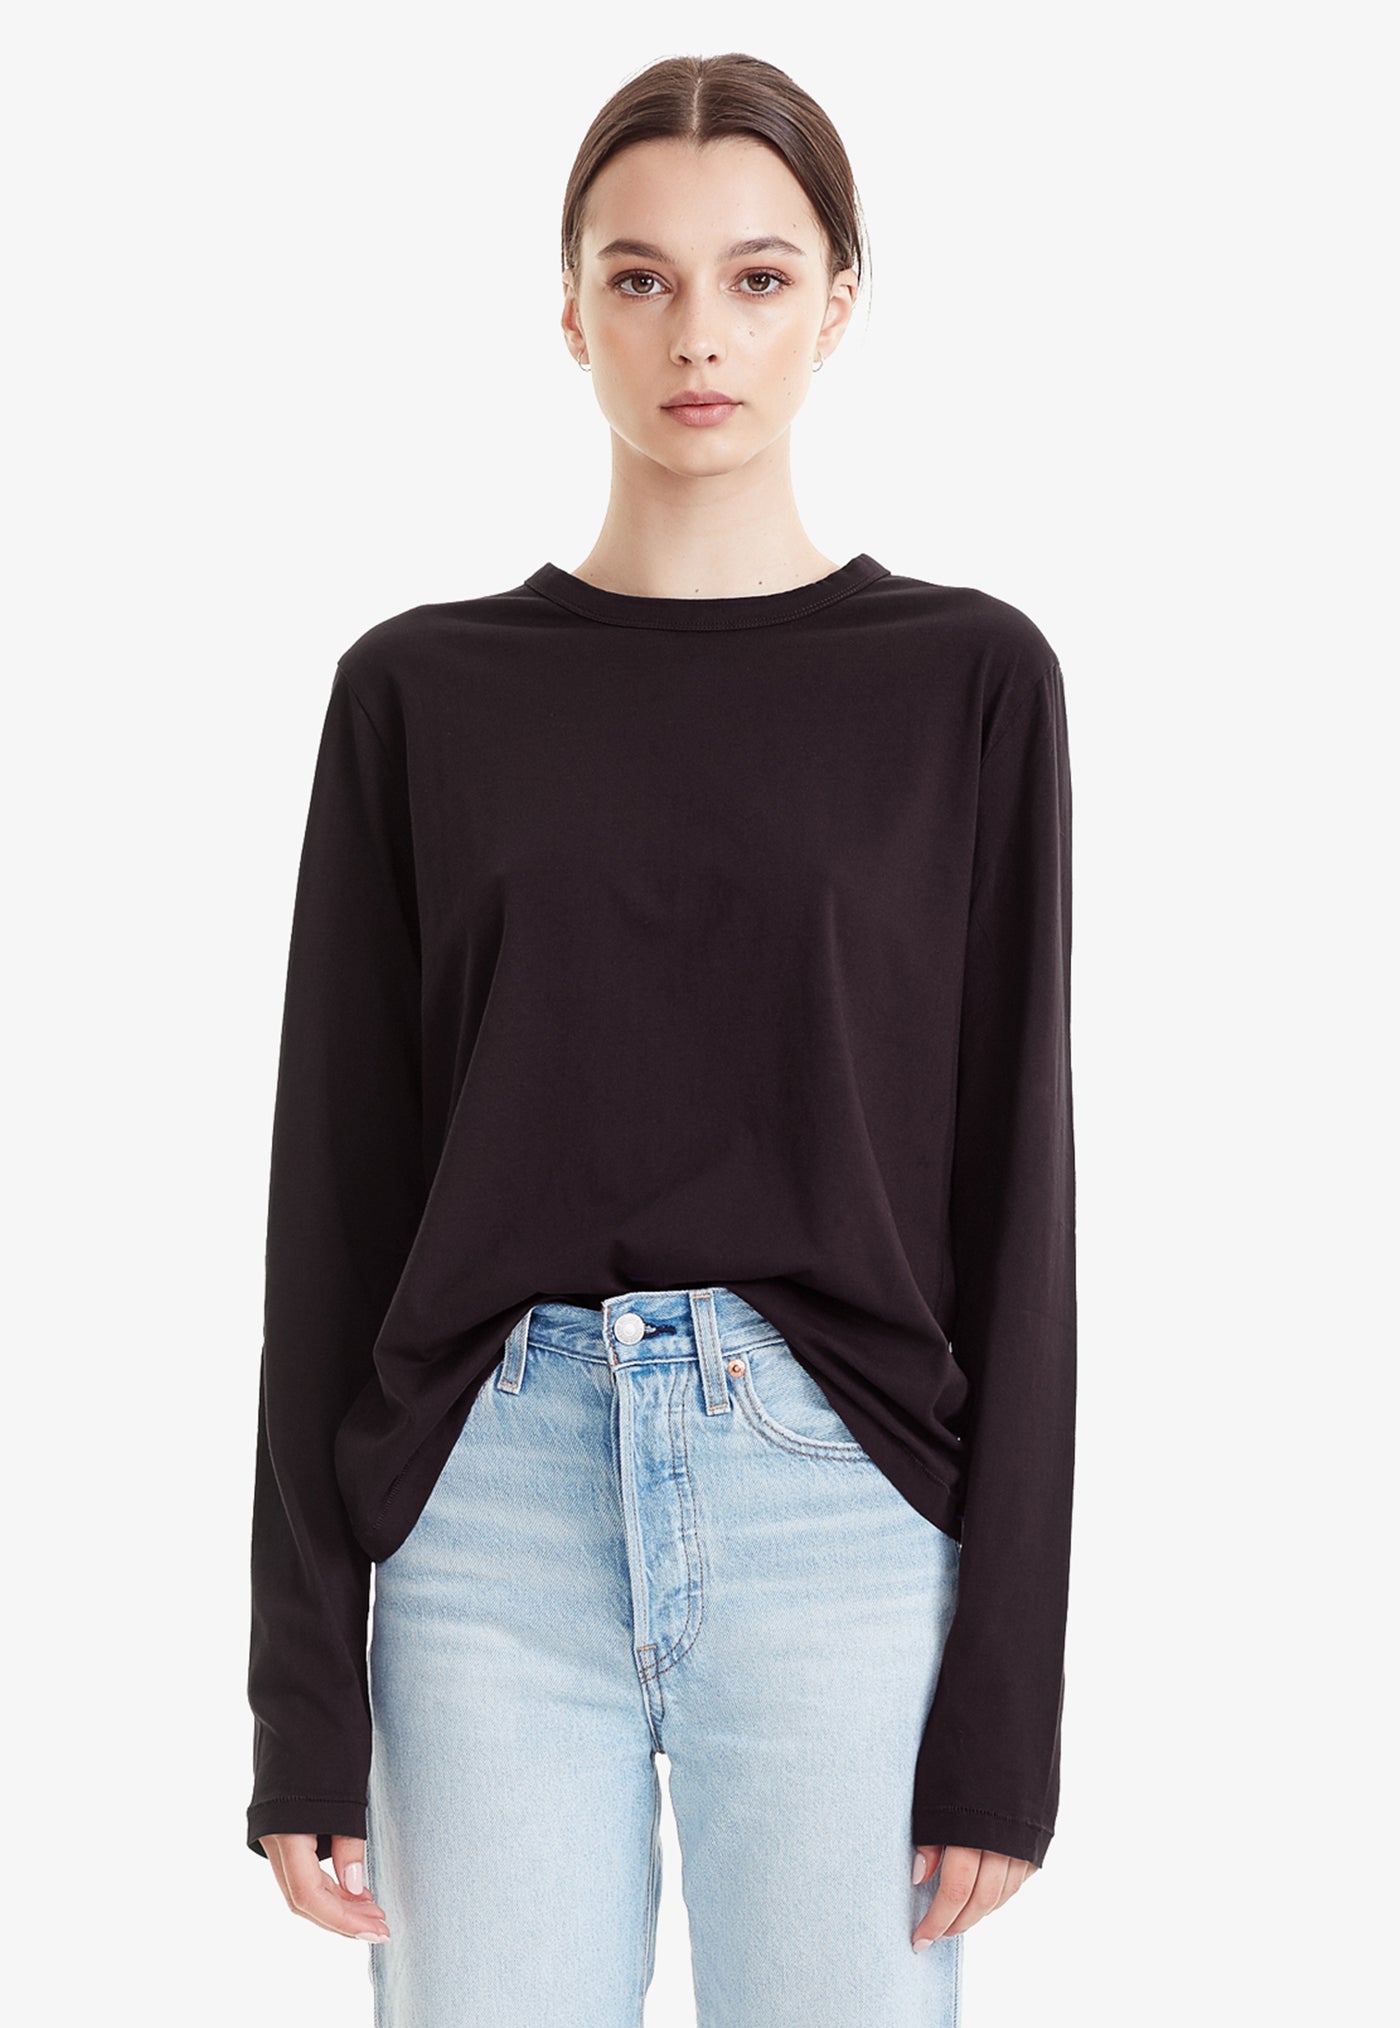 Commoners - Organic Cotton Classic Long Sleeve Tee - Black sold by Angel Divine